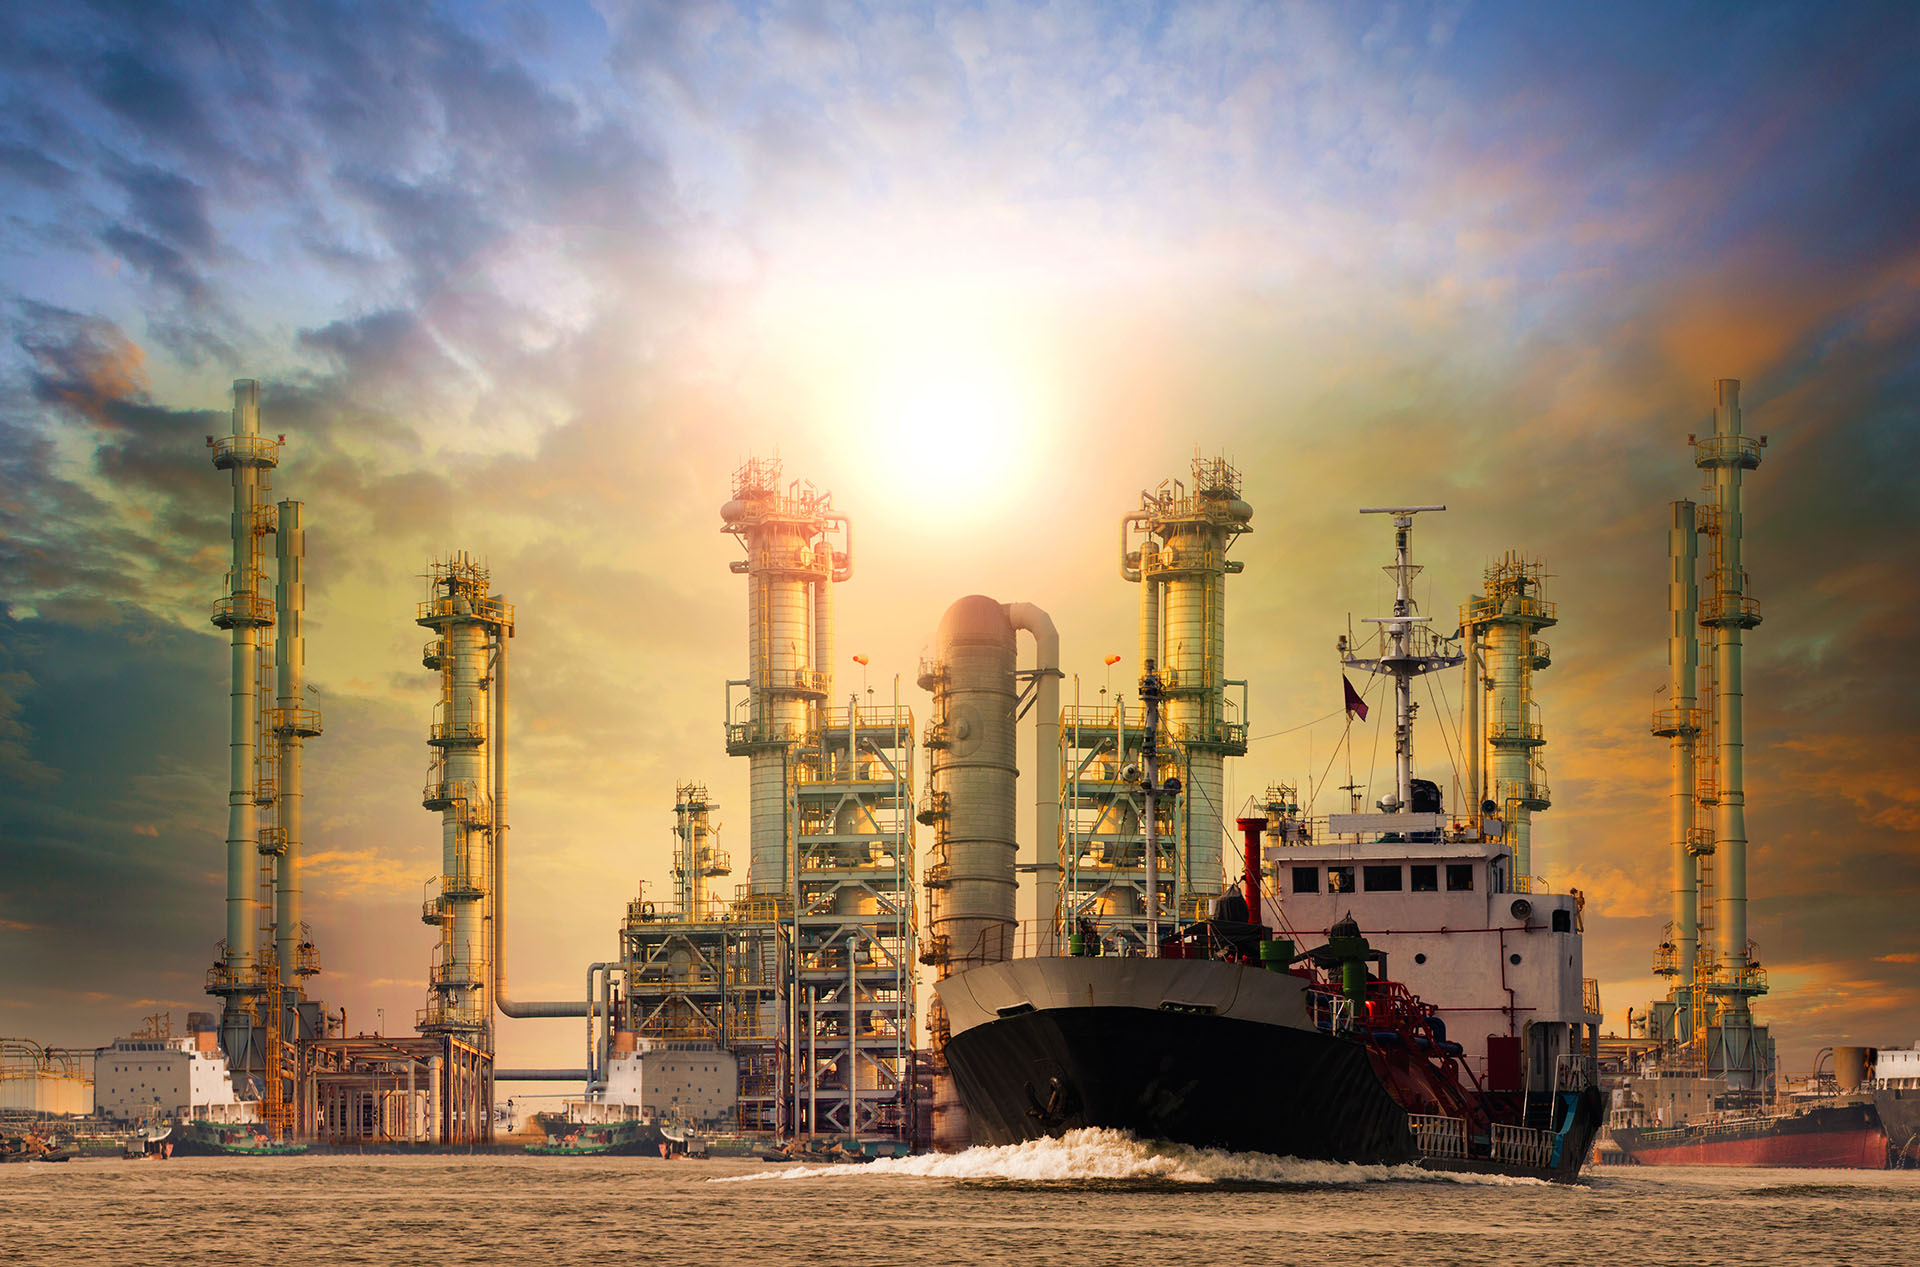 Petroleum refiners and shippers struggle  over marine fuel